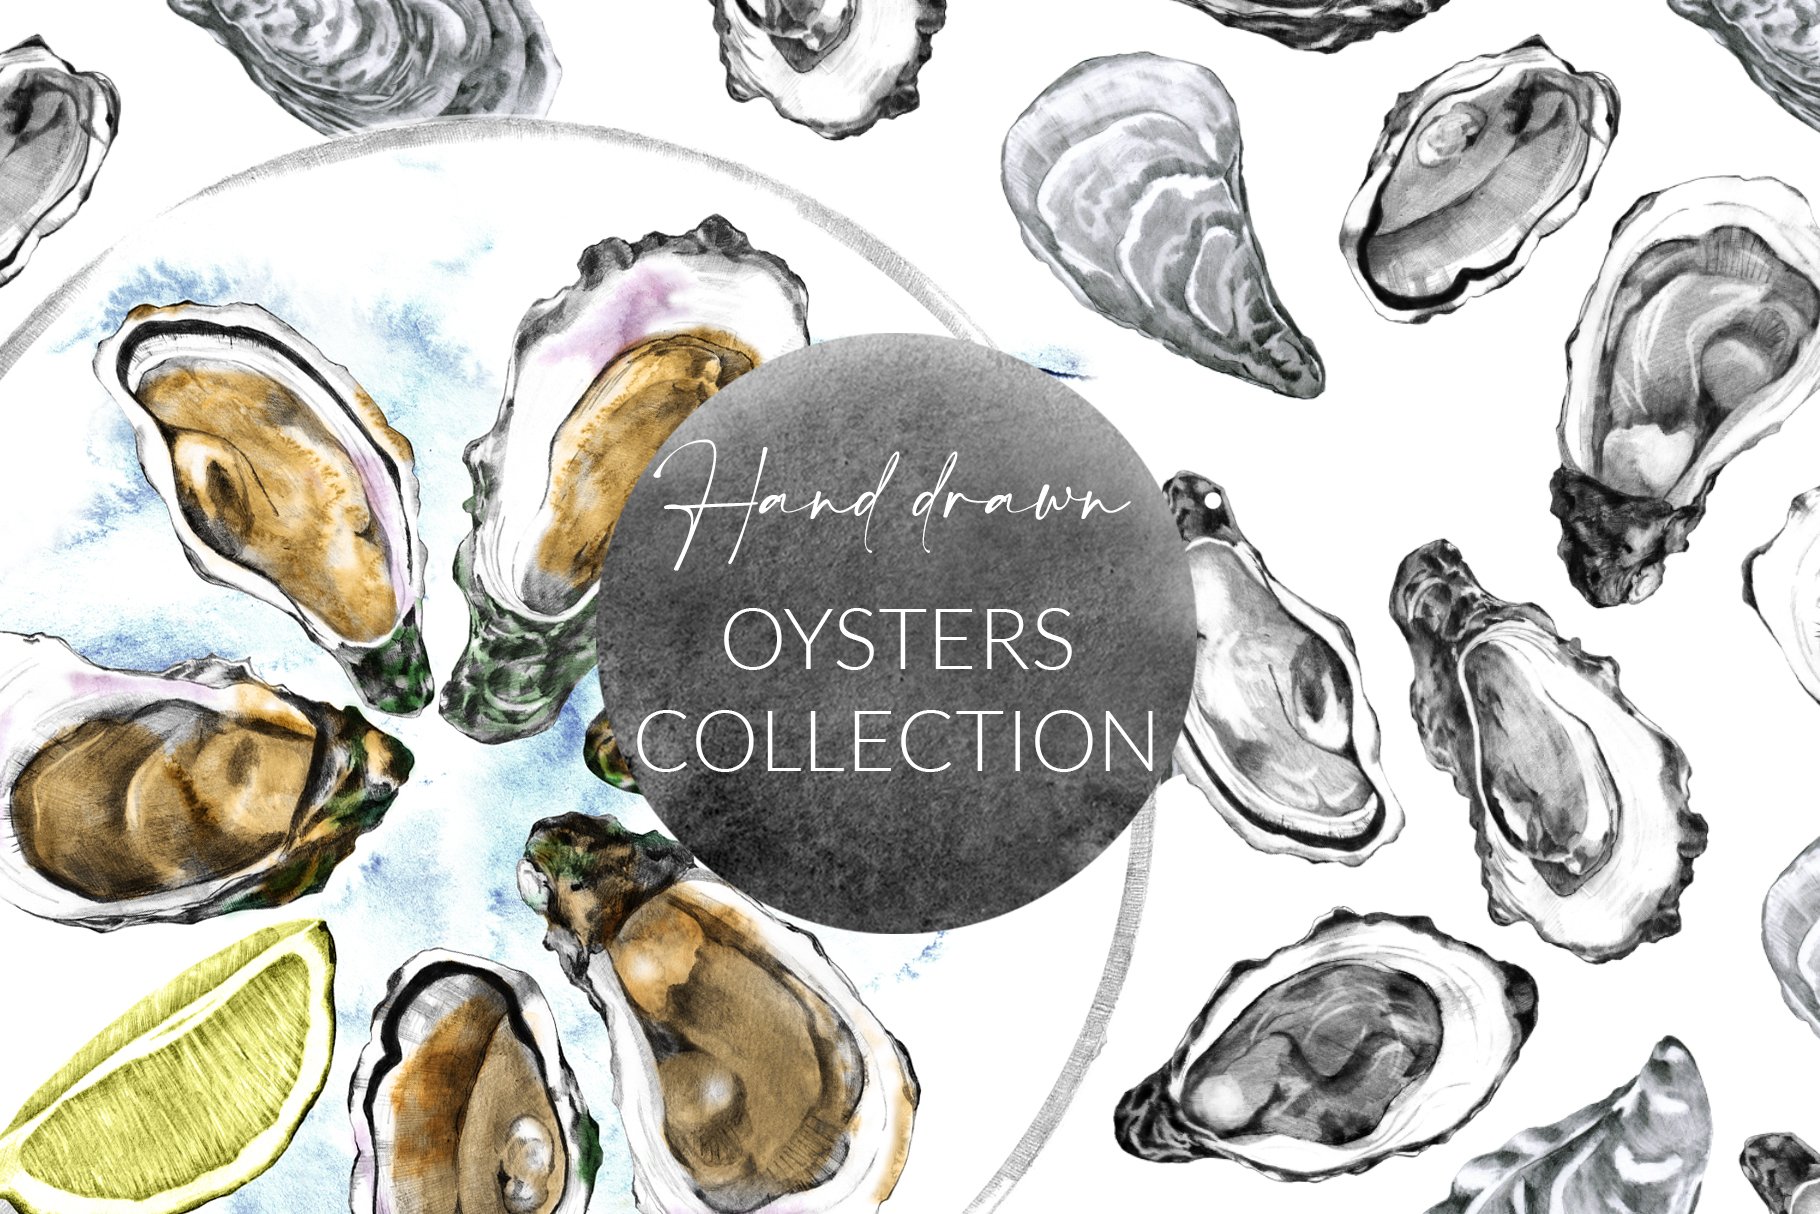 Hand Drawn Oysters Collection cover image.